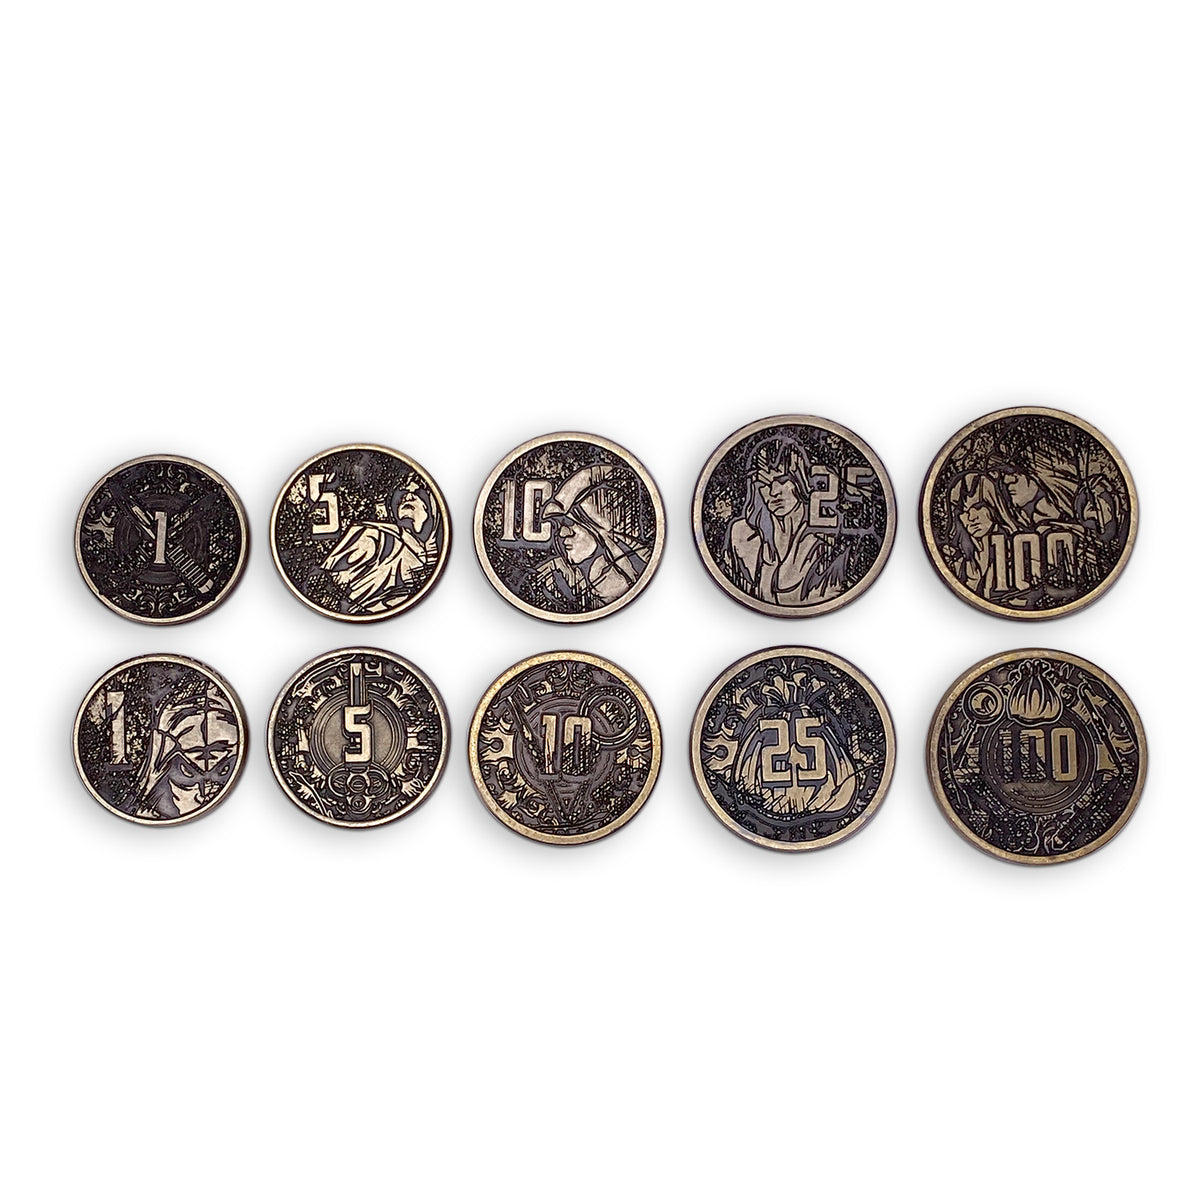 Adventure Coins – Thieves Metal Coins Set of 10